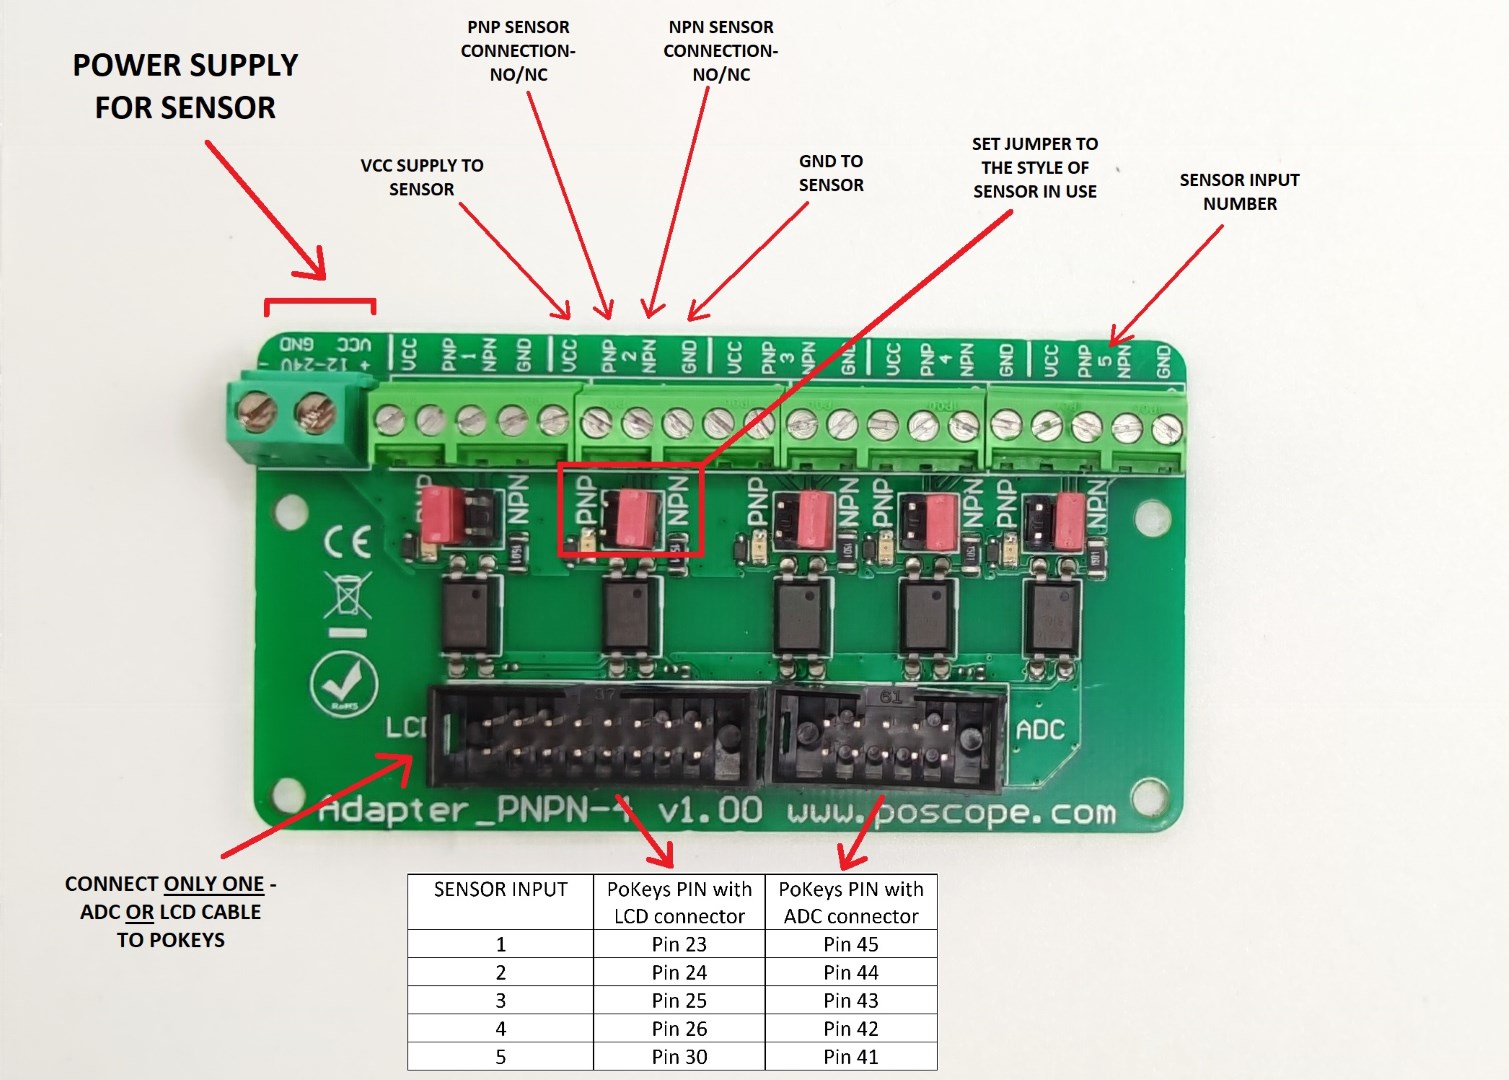 AdapterPNPN with all the connections marked and pinout shown